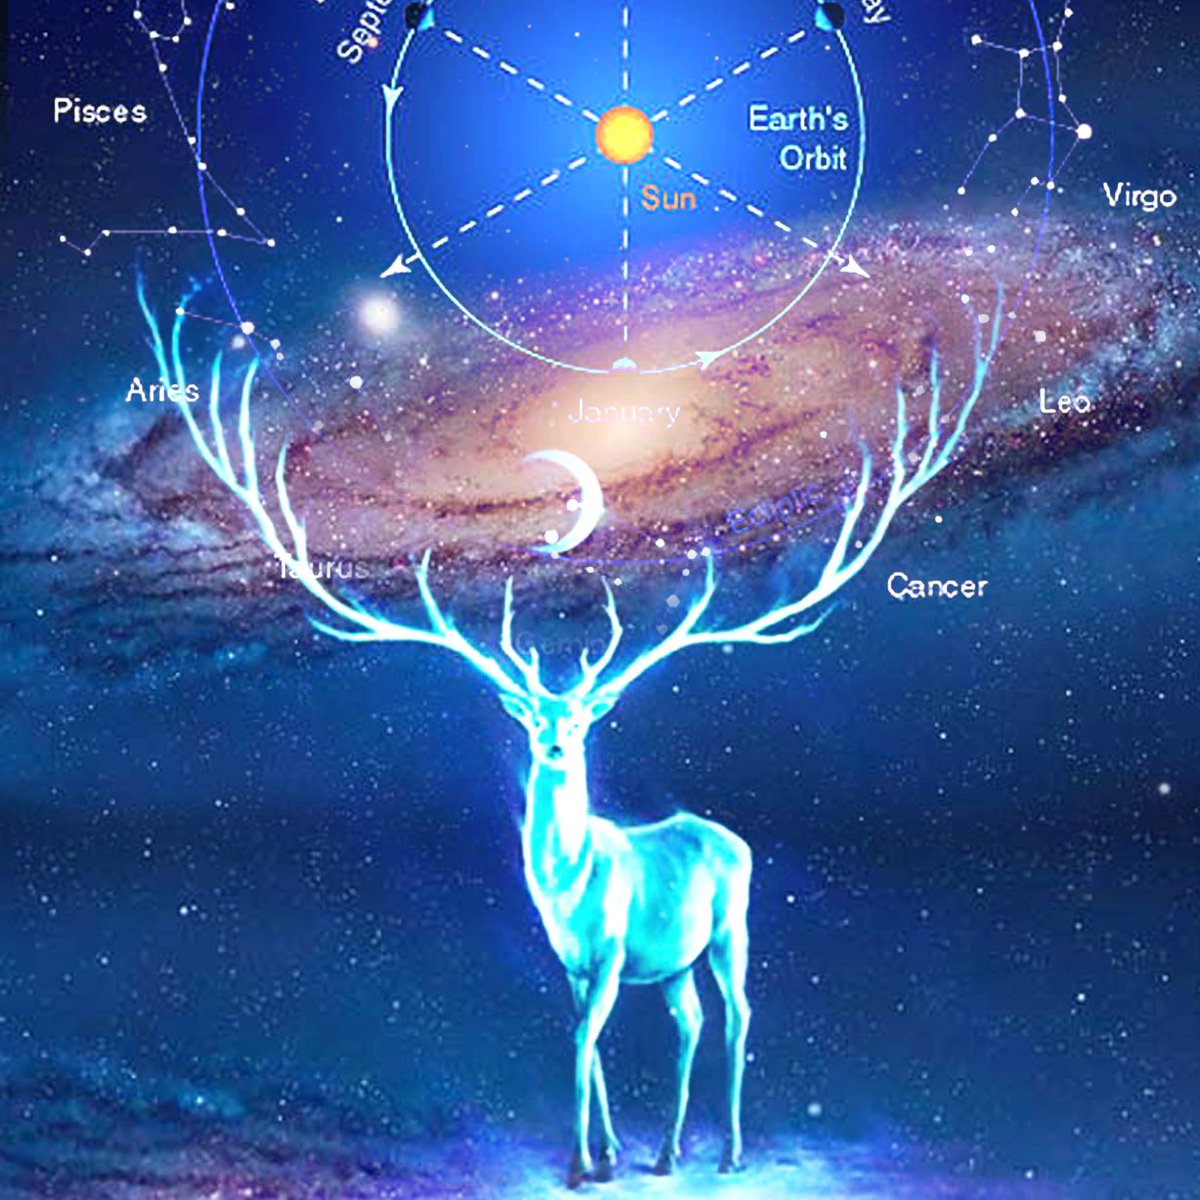 materialistic. Its Ayurvedic Dosha is Kapha. And, being all in the Vedic sign Taurus, its quality is Fixed. The first pada of Rohini is Aries pada, Mars ruled quality brings passionate, impulsive, impatient nature.